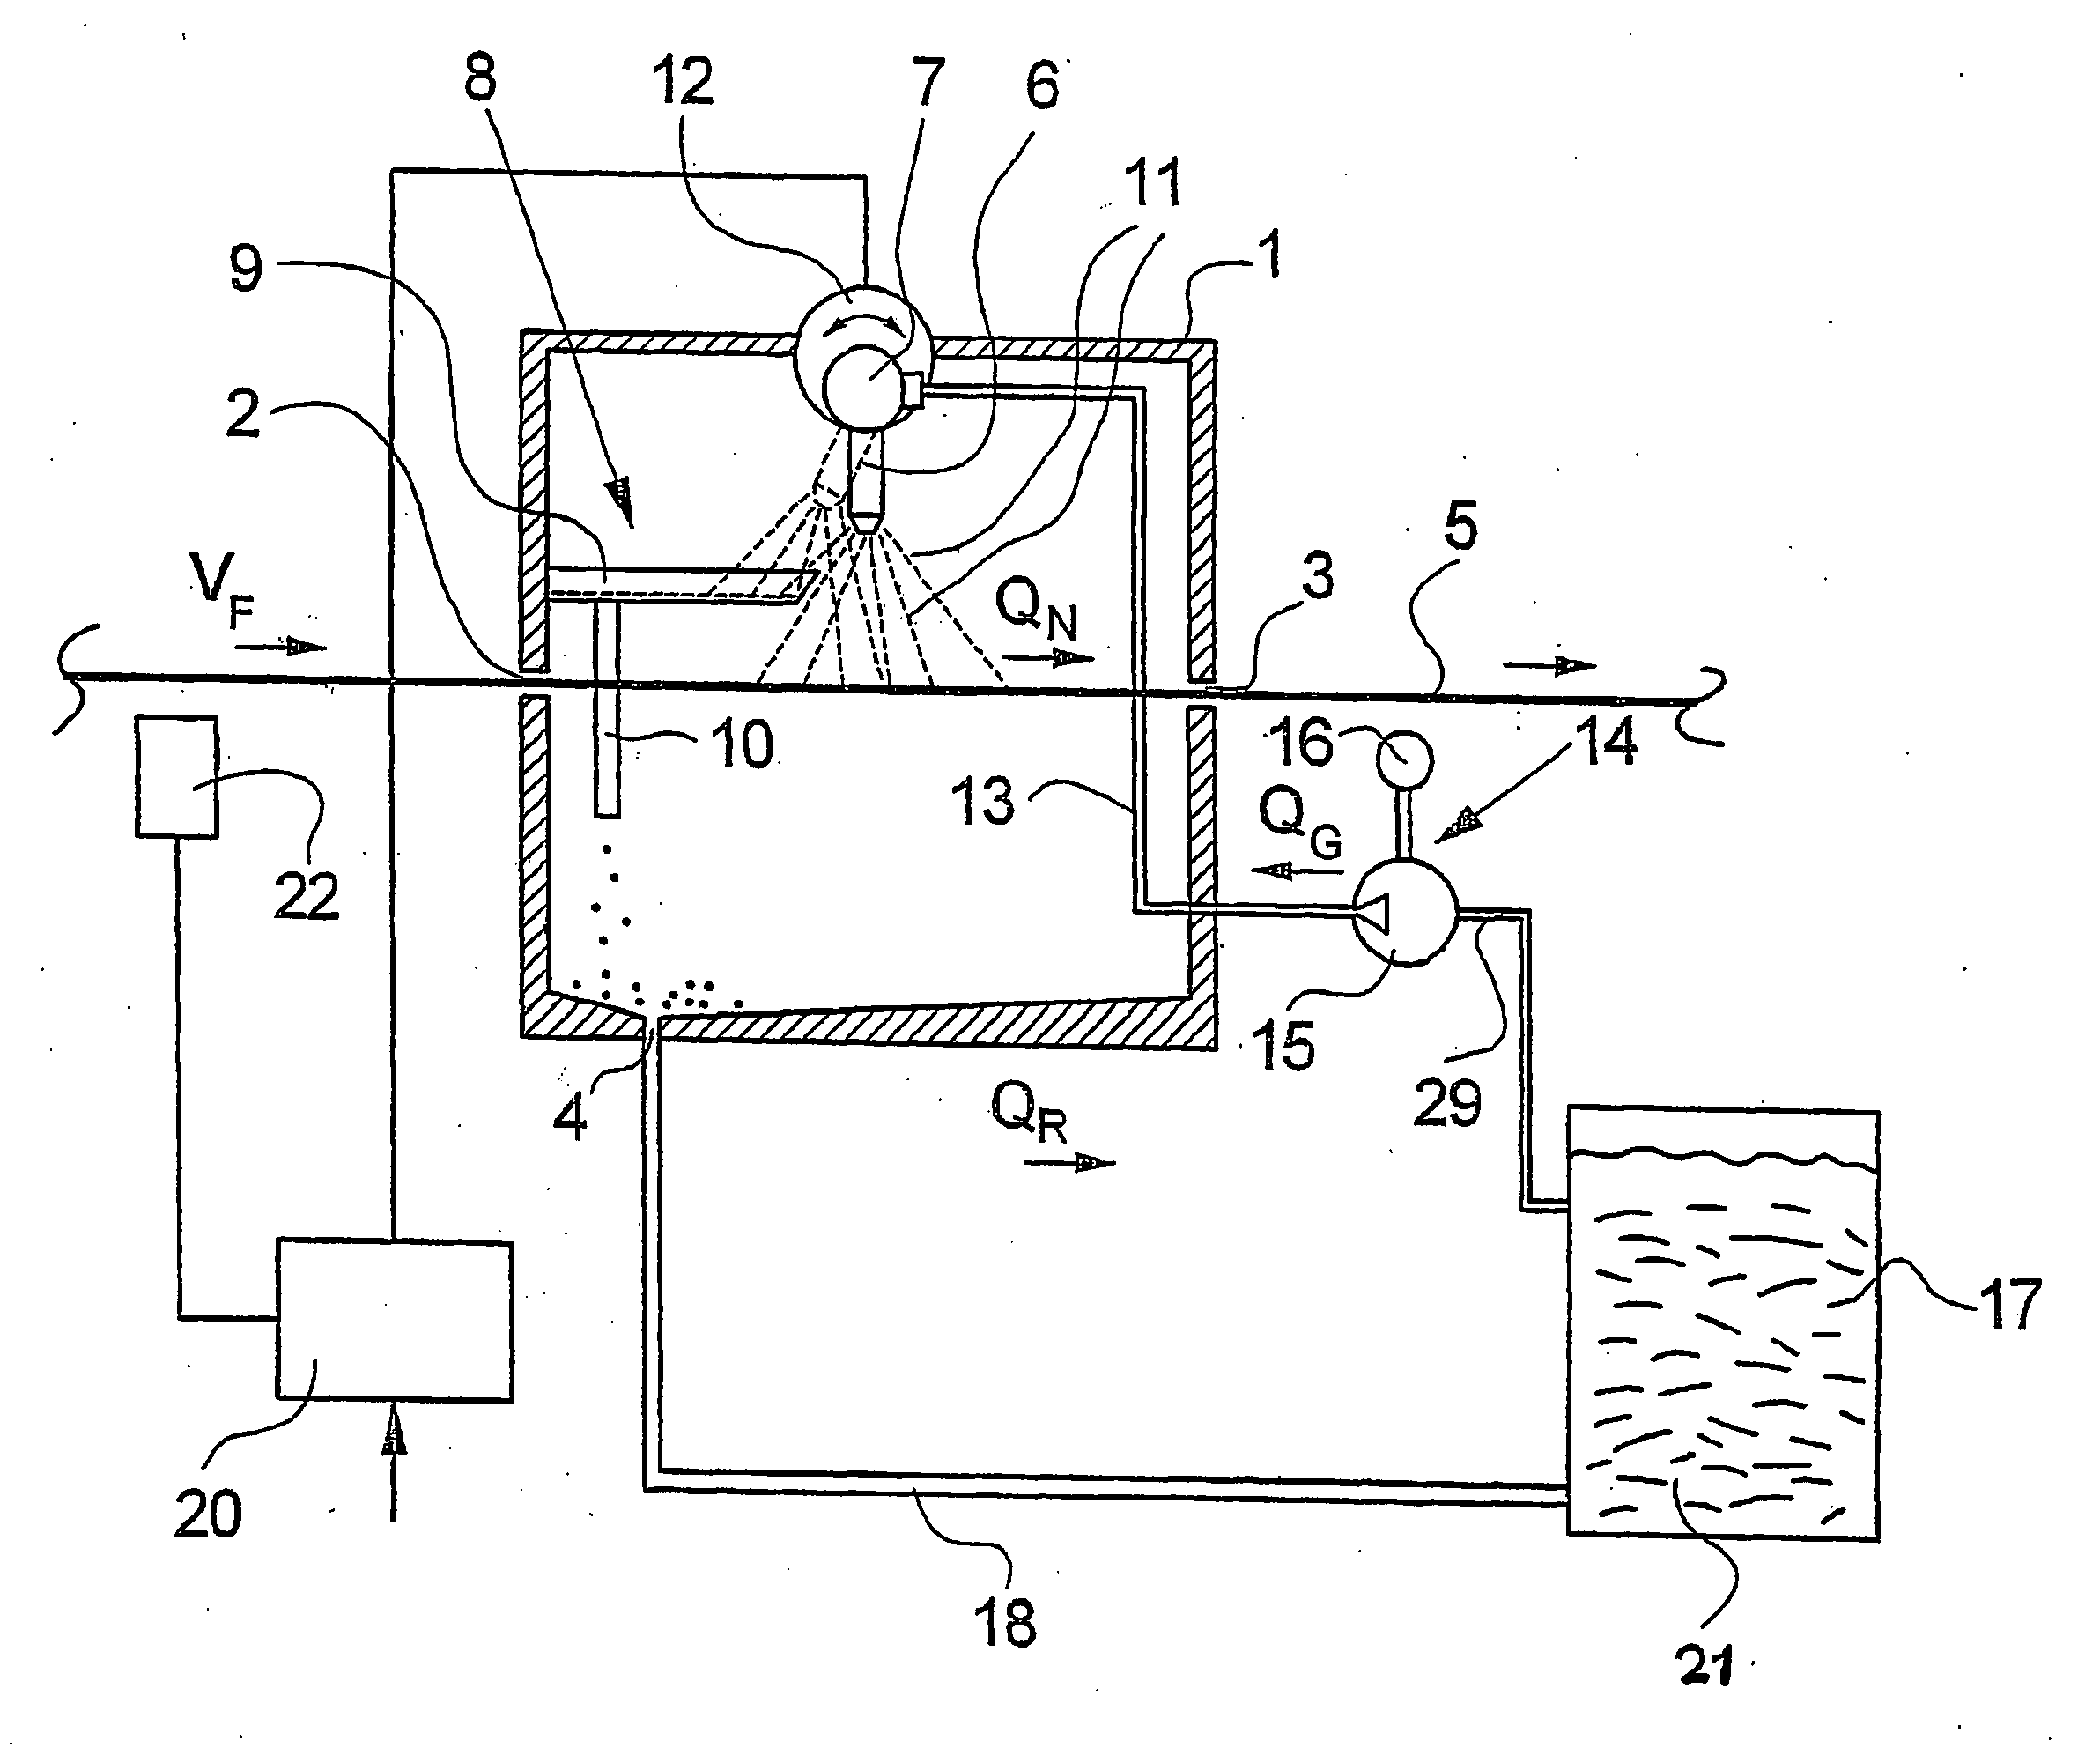 Apparatus for wetting a running filament strand